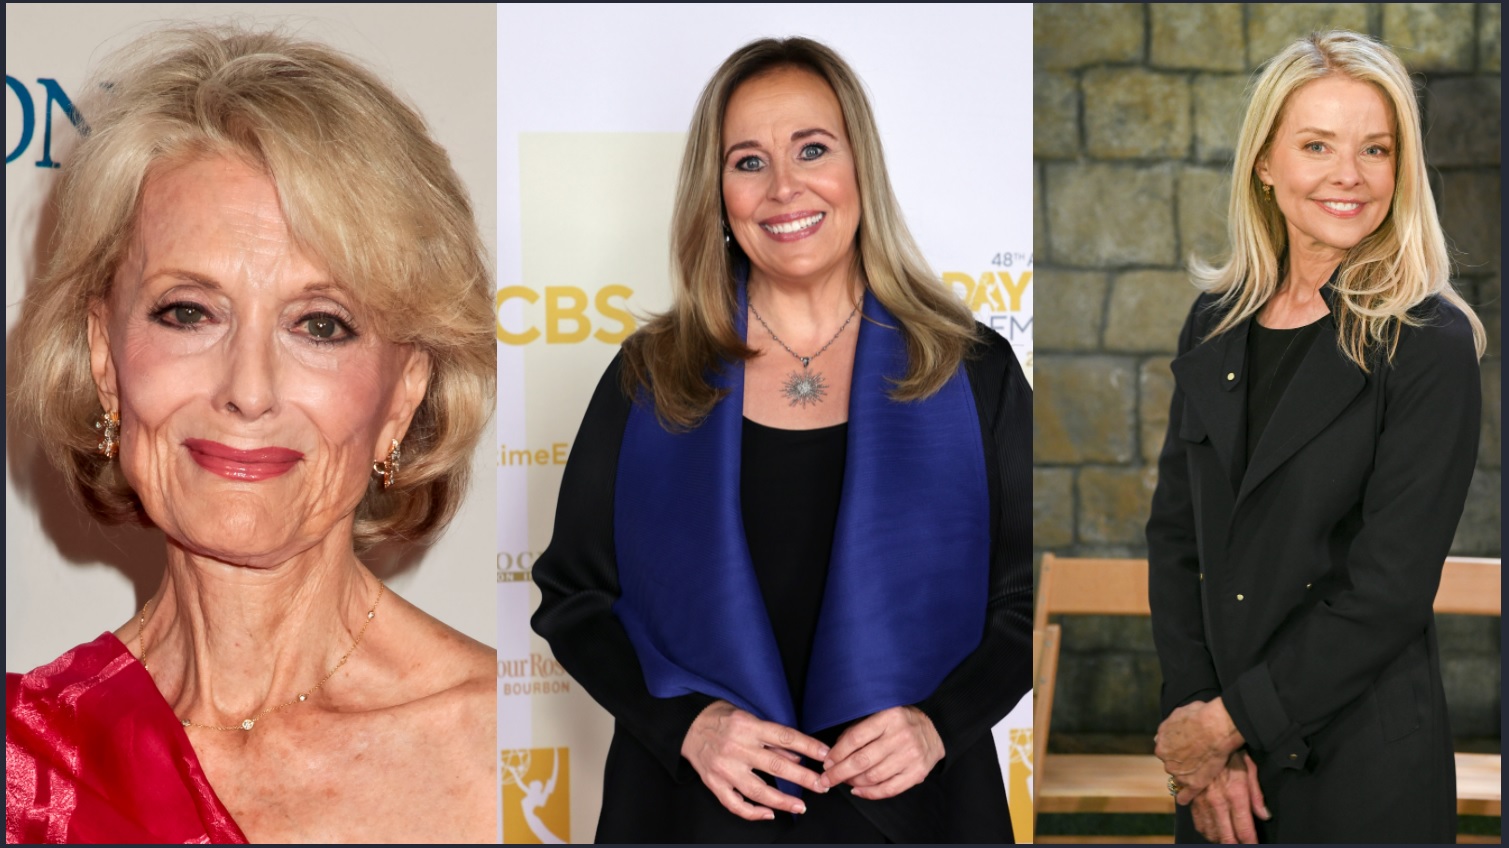 General Hospital stars Constance Towers, Genie Francis, and Kristina Wagner